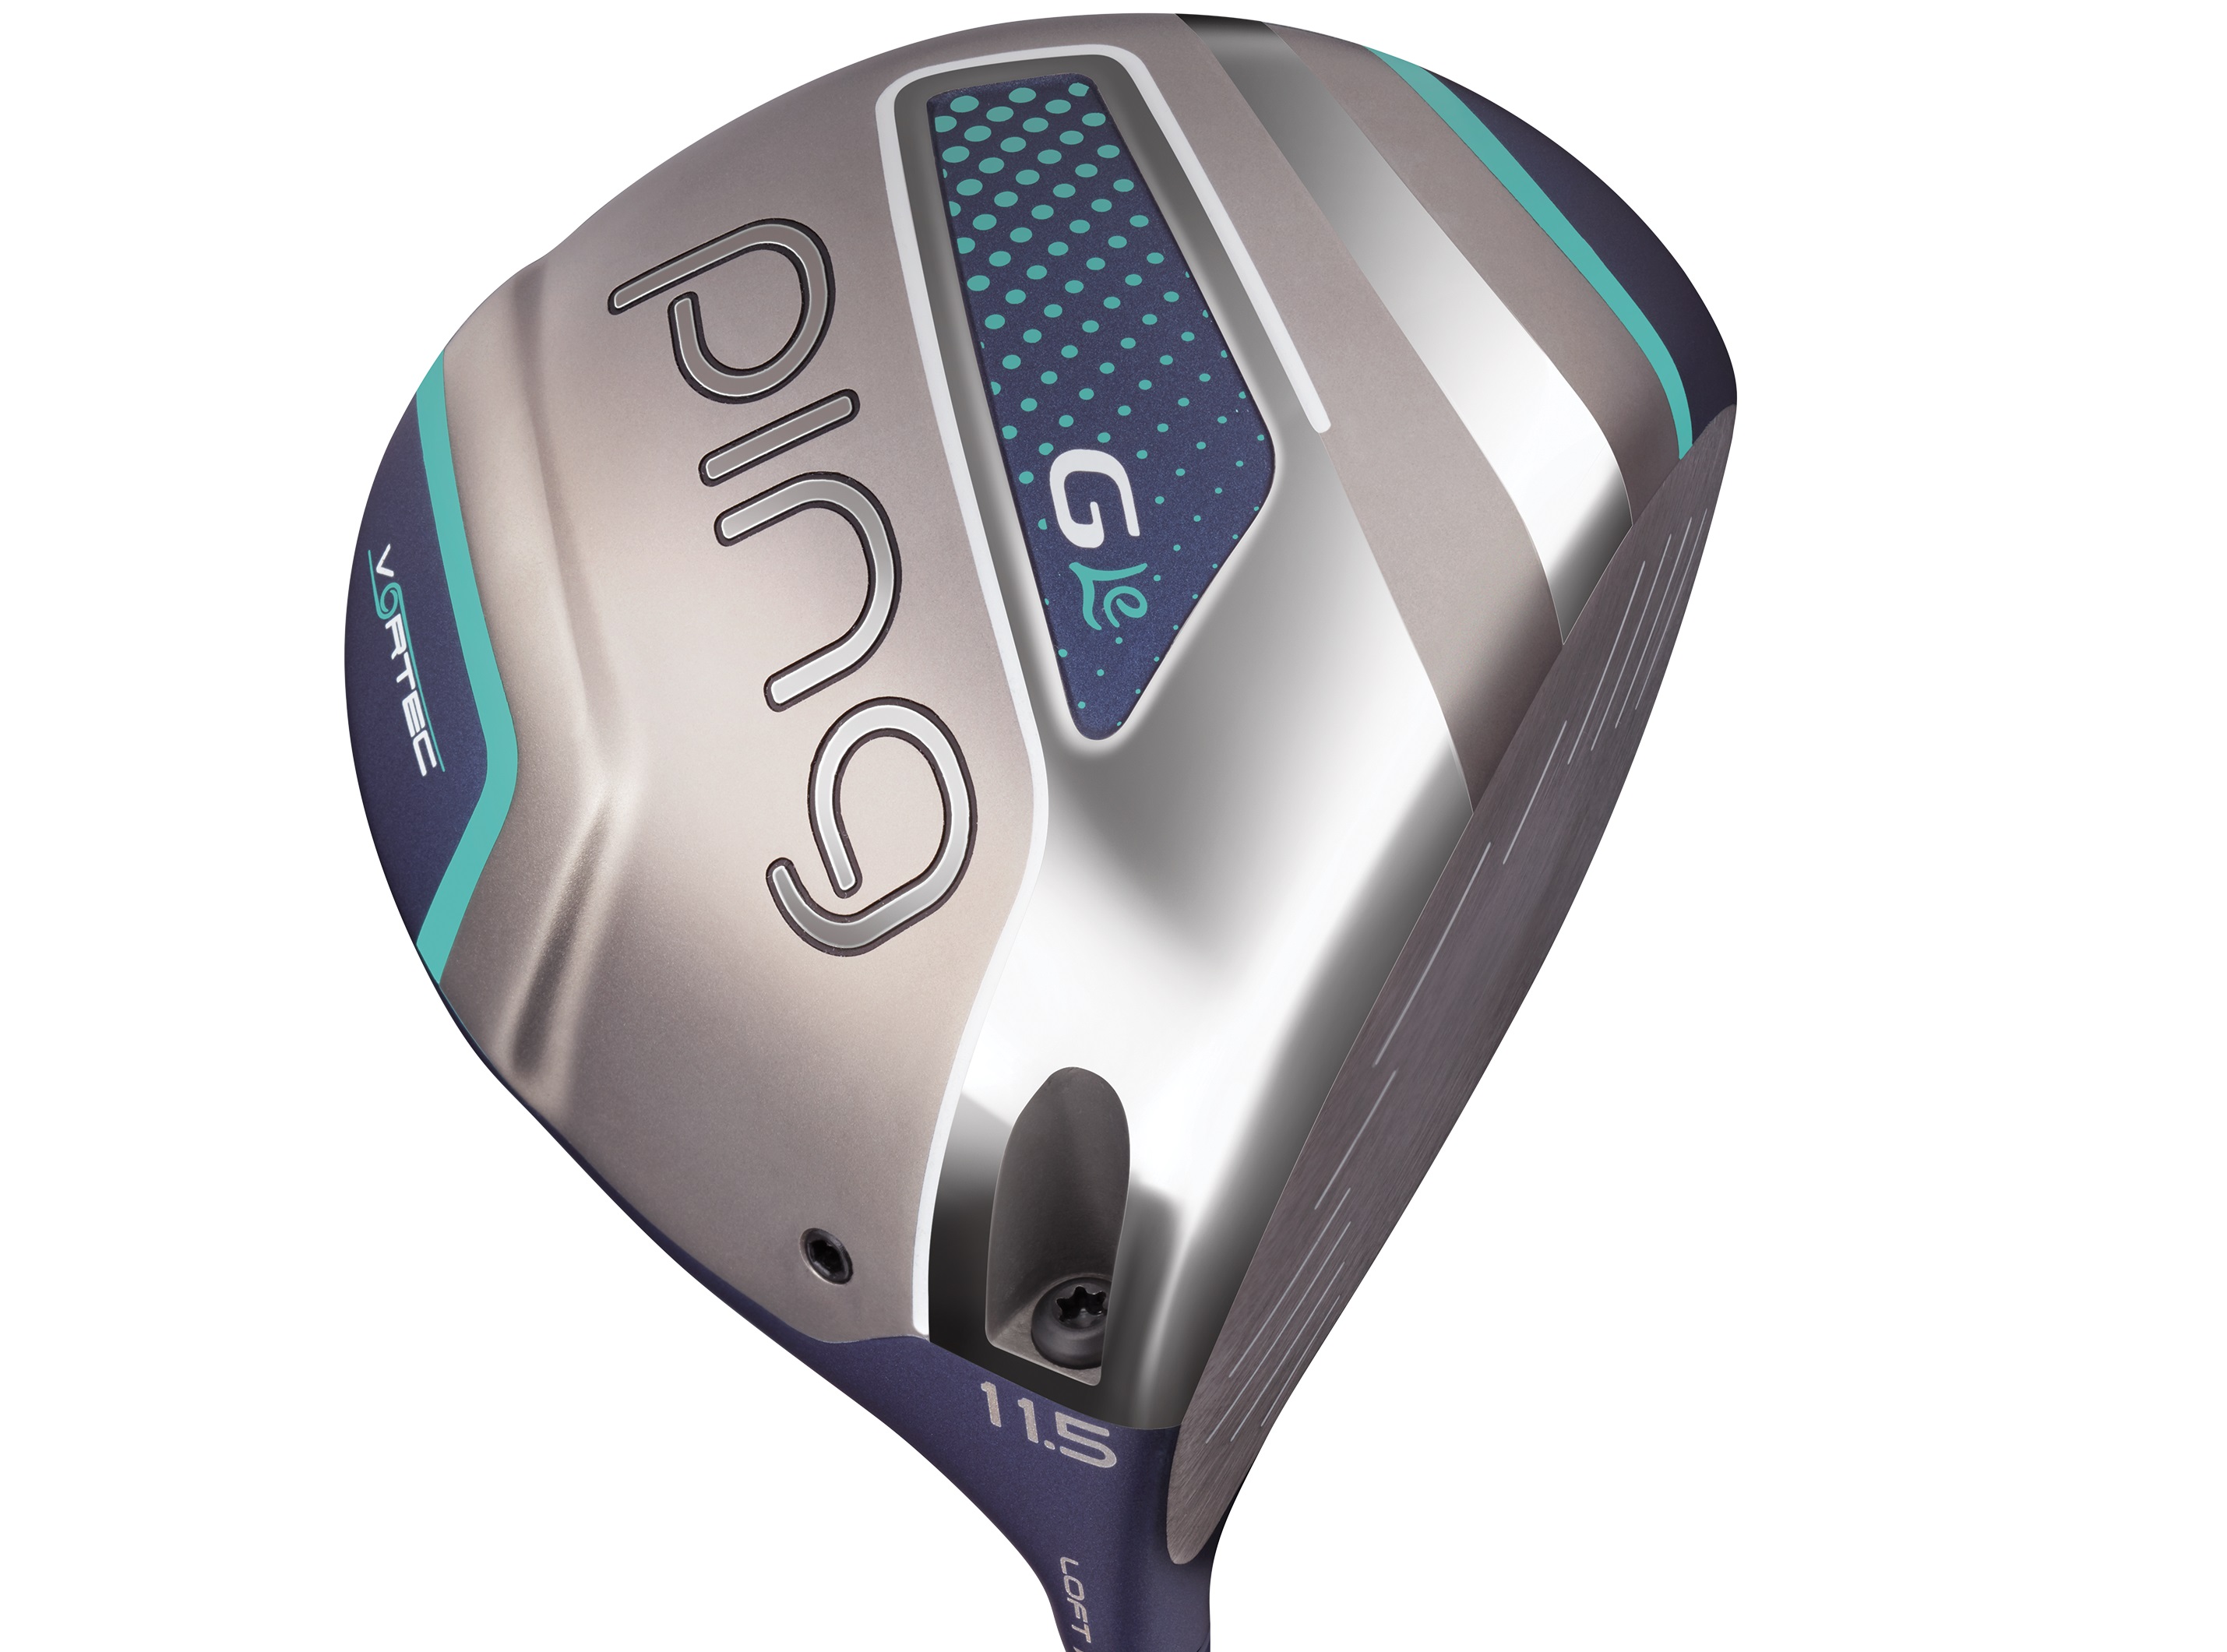 PING unveils G Le golf clubs for women 